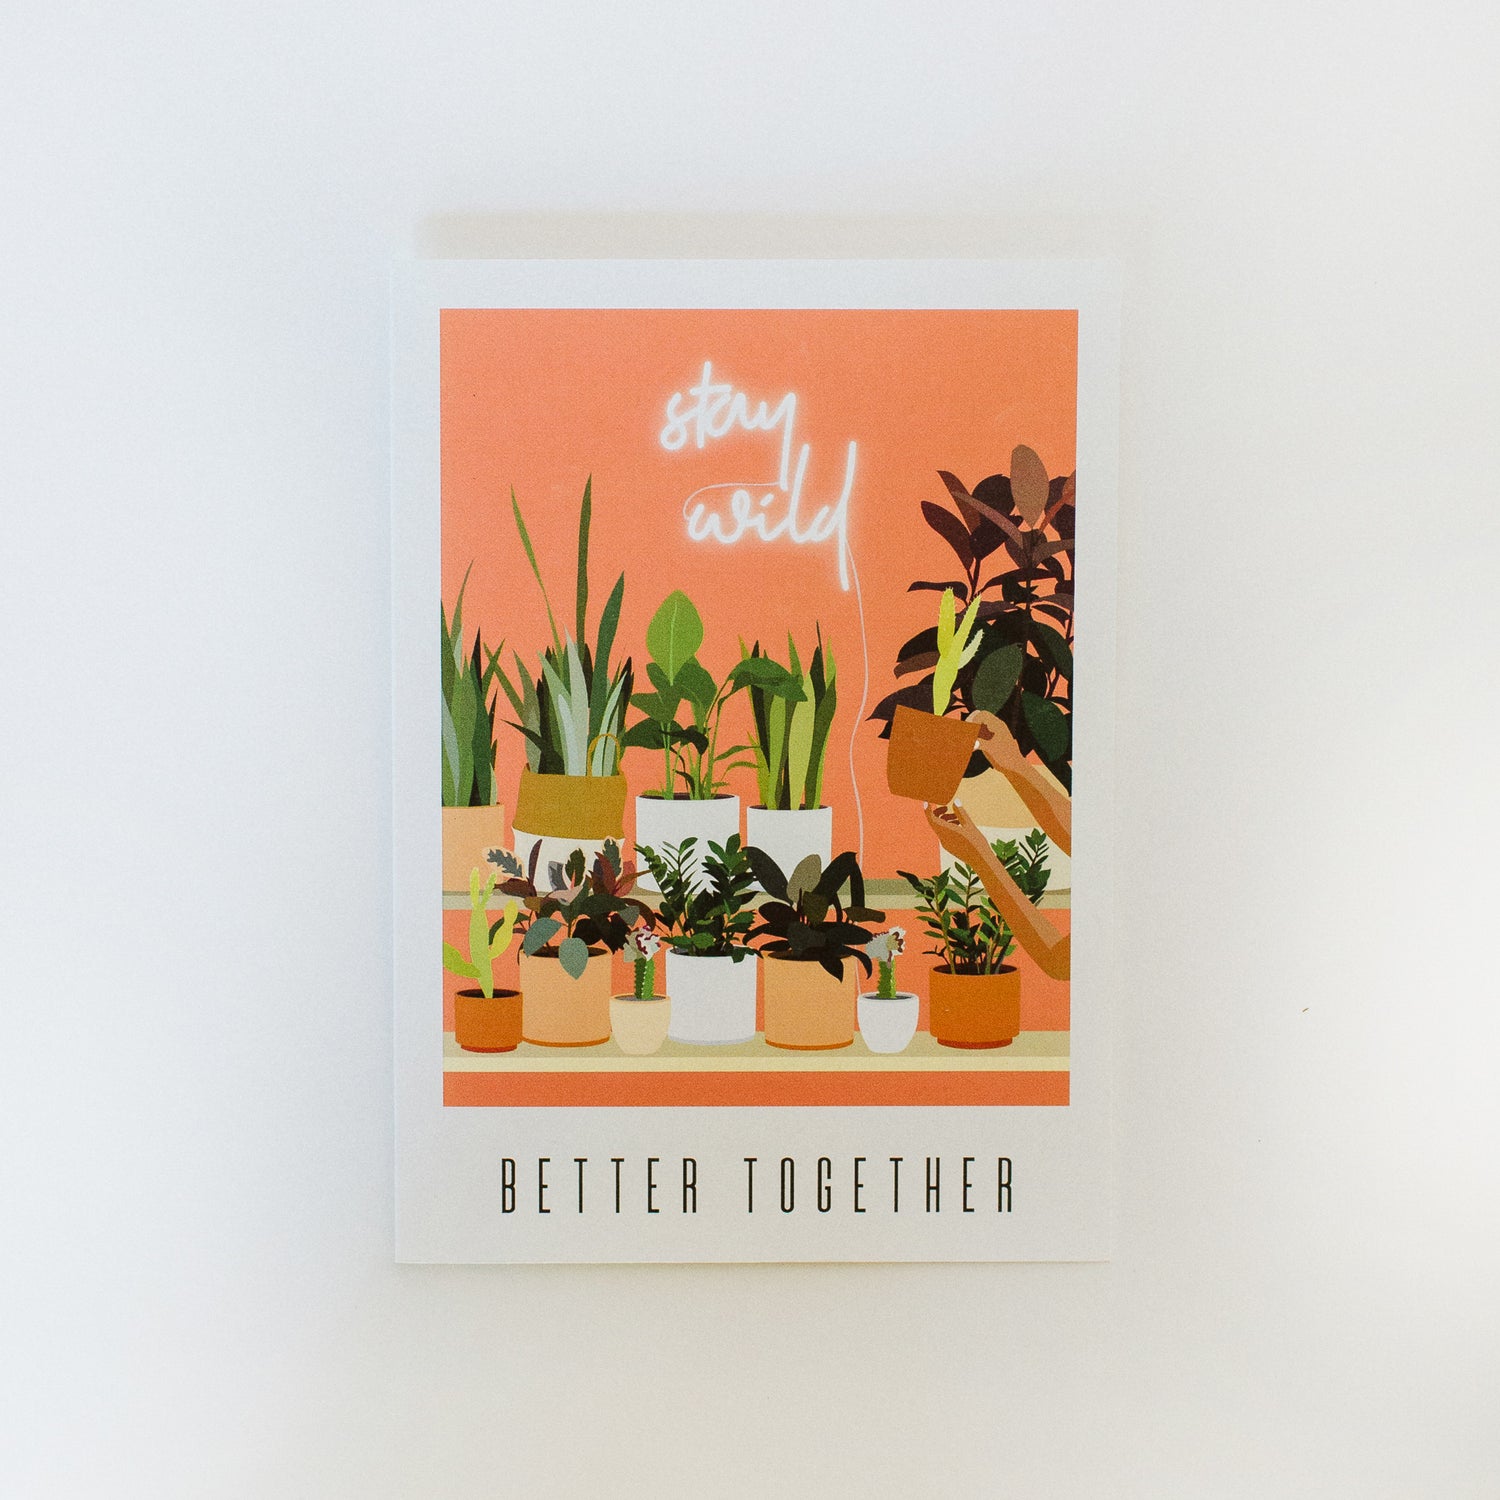 Greeting Card: Better Together